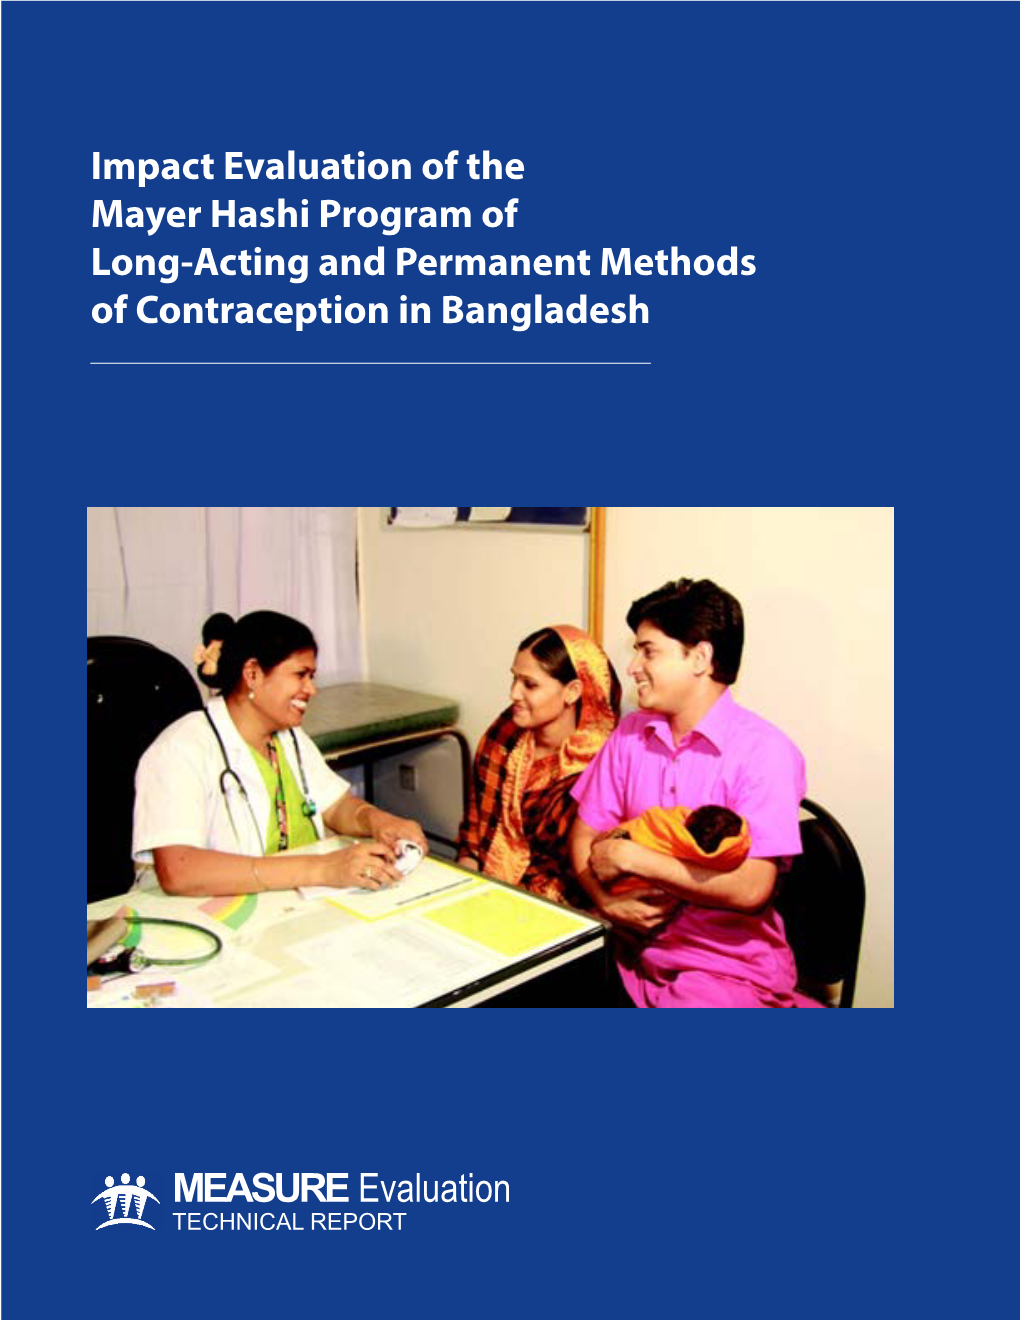 Of Contraception in Bangladesh